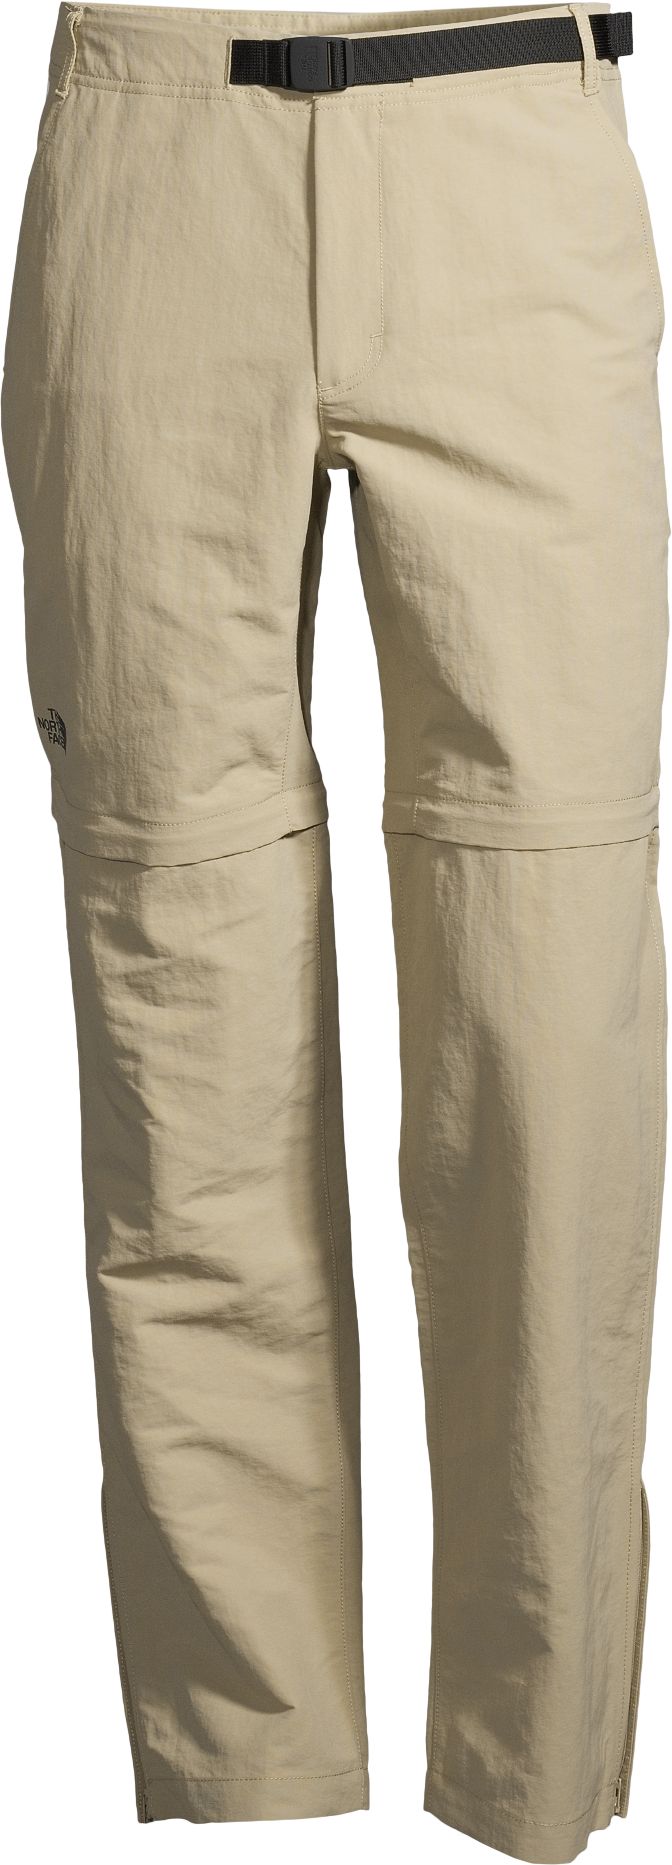 North Face Outdoor Convertible Hiking Pants Mens Size 36WX30L Beige Color!